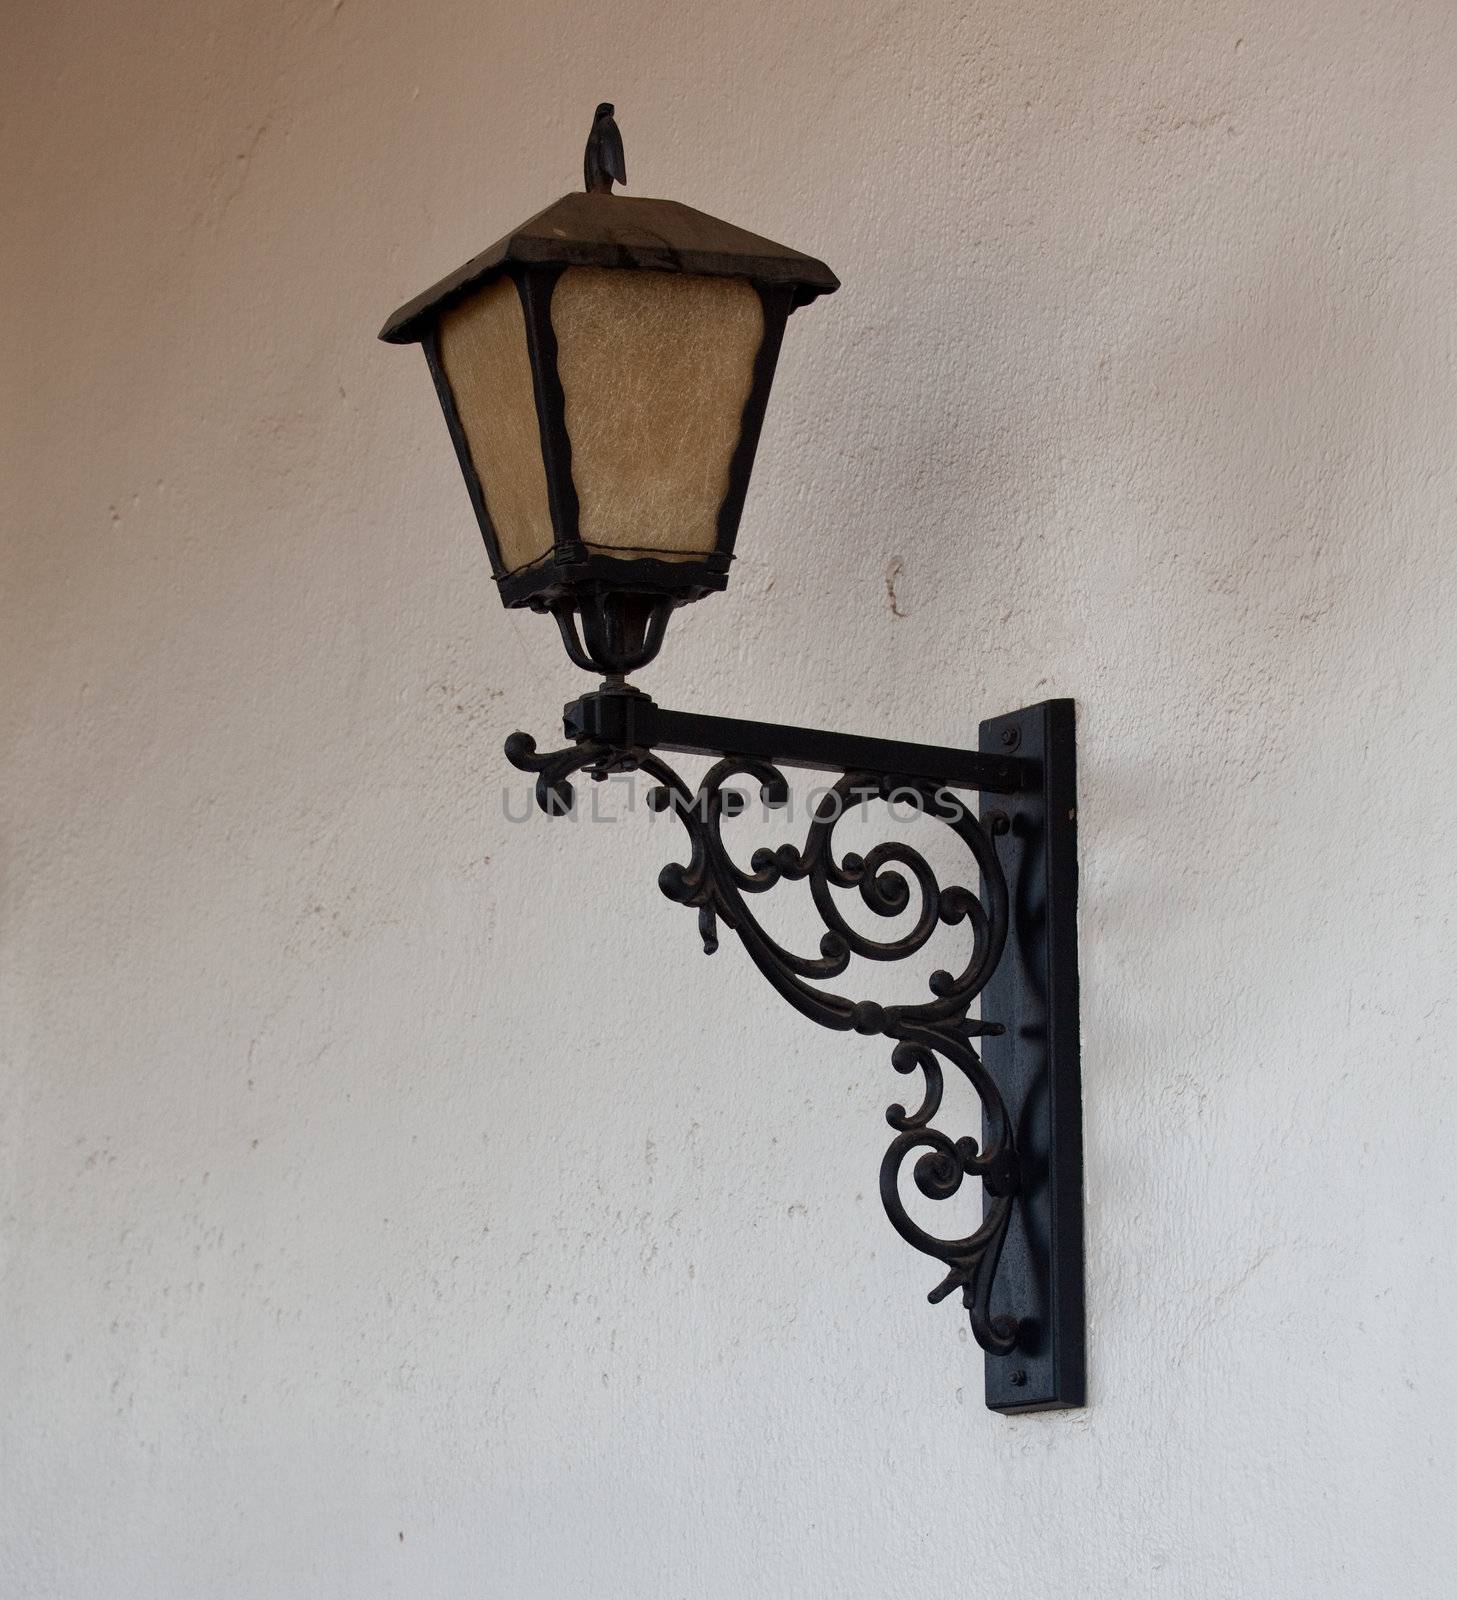 Black lacquered ornate lantern against a stucco wall of a mission in California